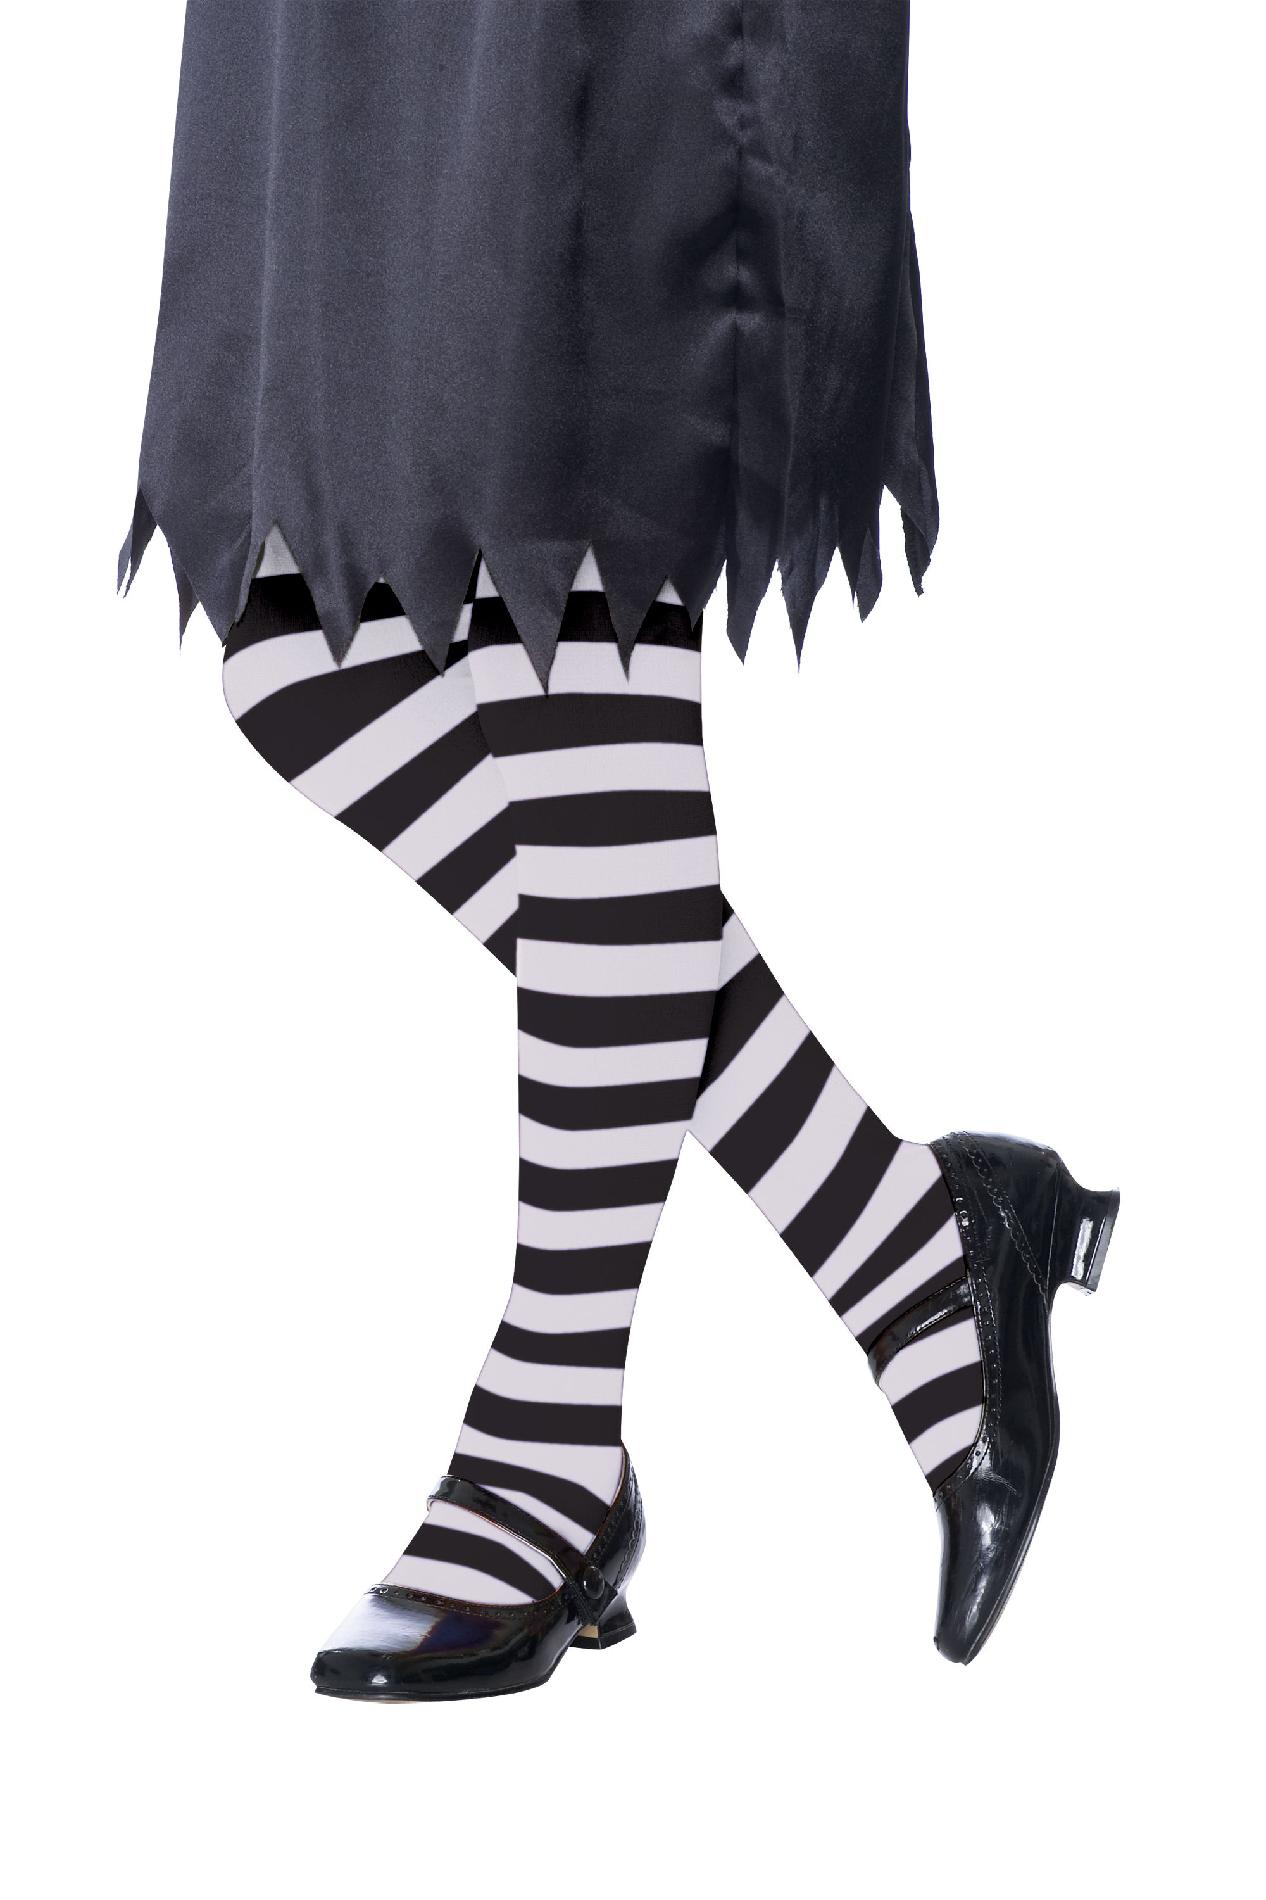 Kids White Striped Tights Halloween Costume Accessory